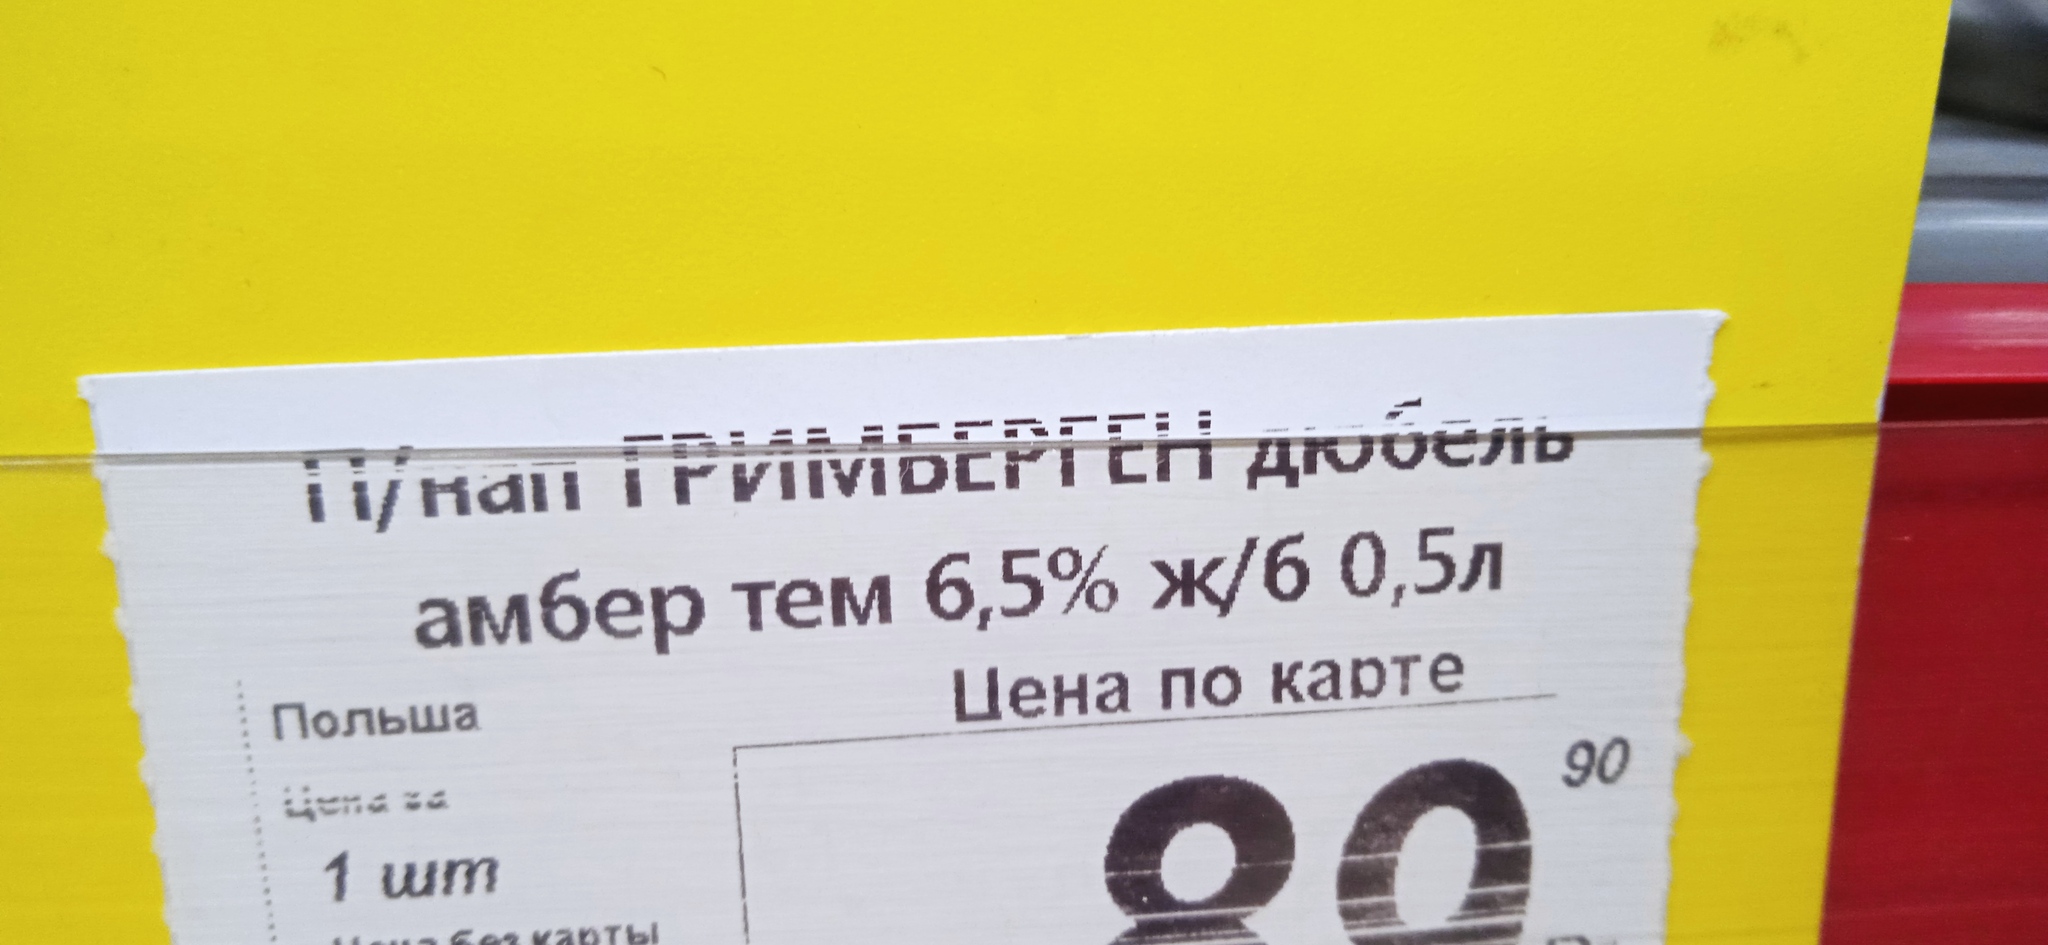 Well, I don't know about you, but I laughed. - Beer, Price tag, Spar, Language, 